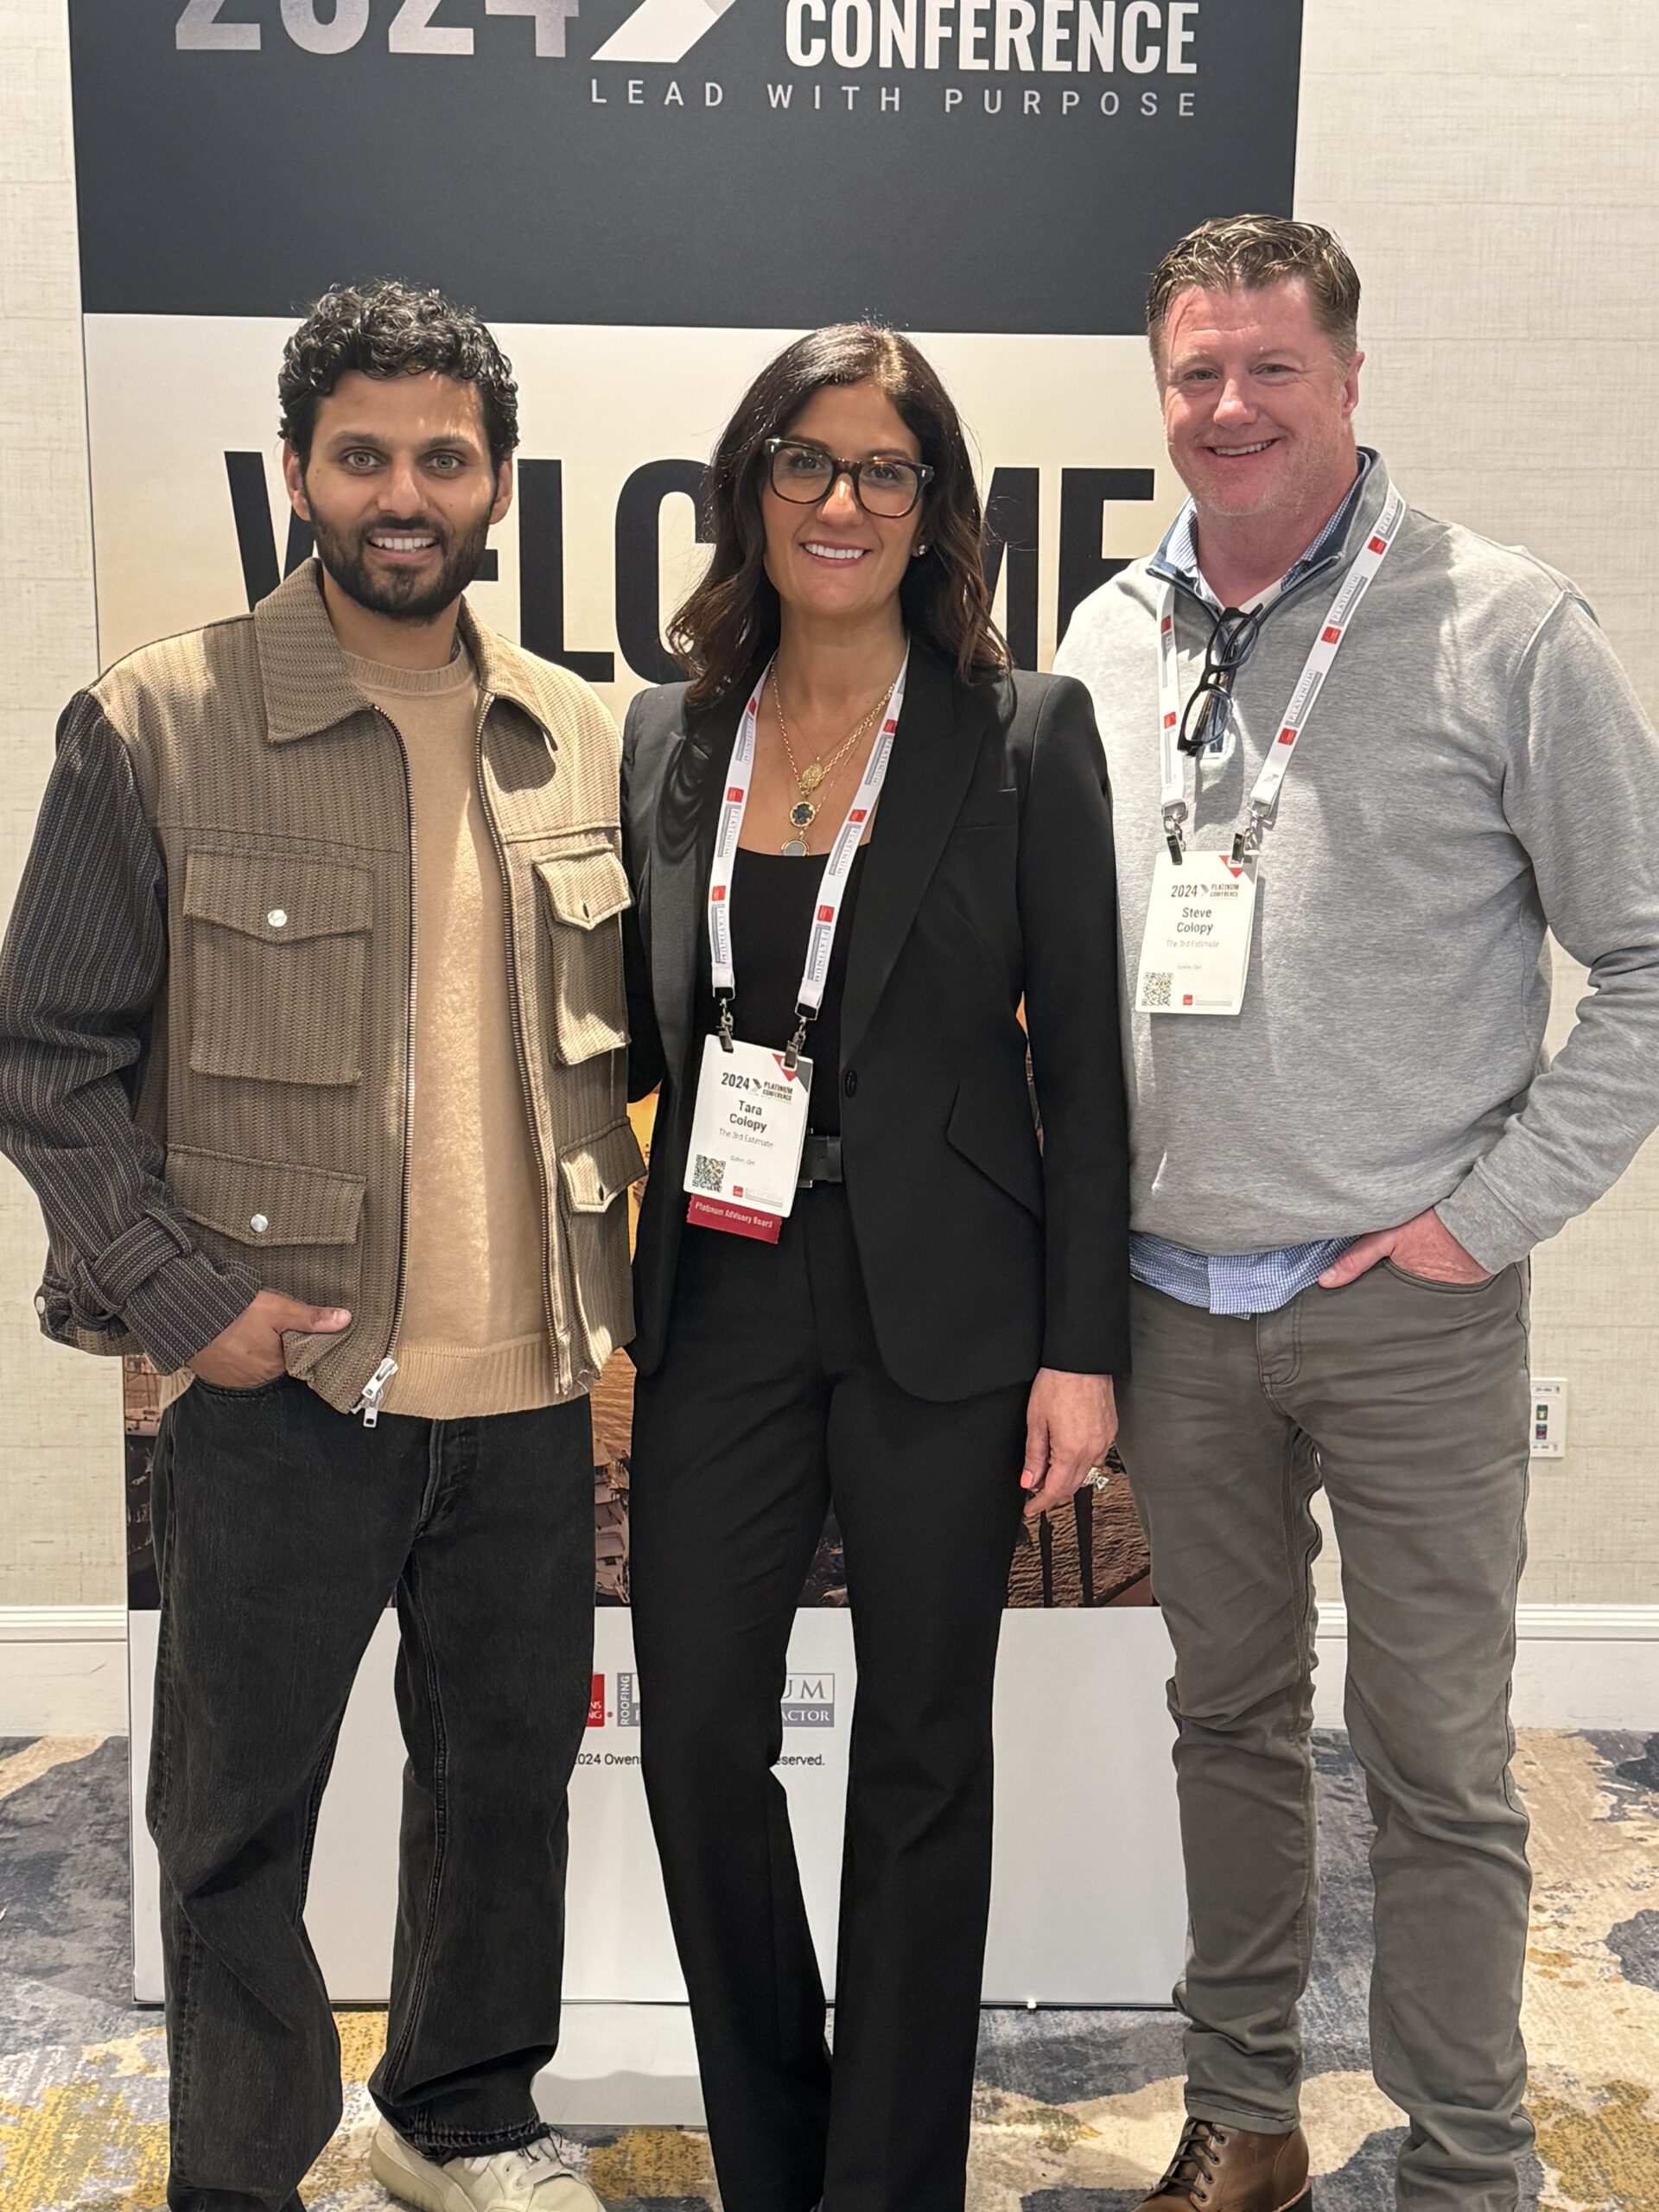 Steve and Tara Colopy with best-selling author and speaker, Jay Shetty.